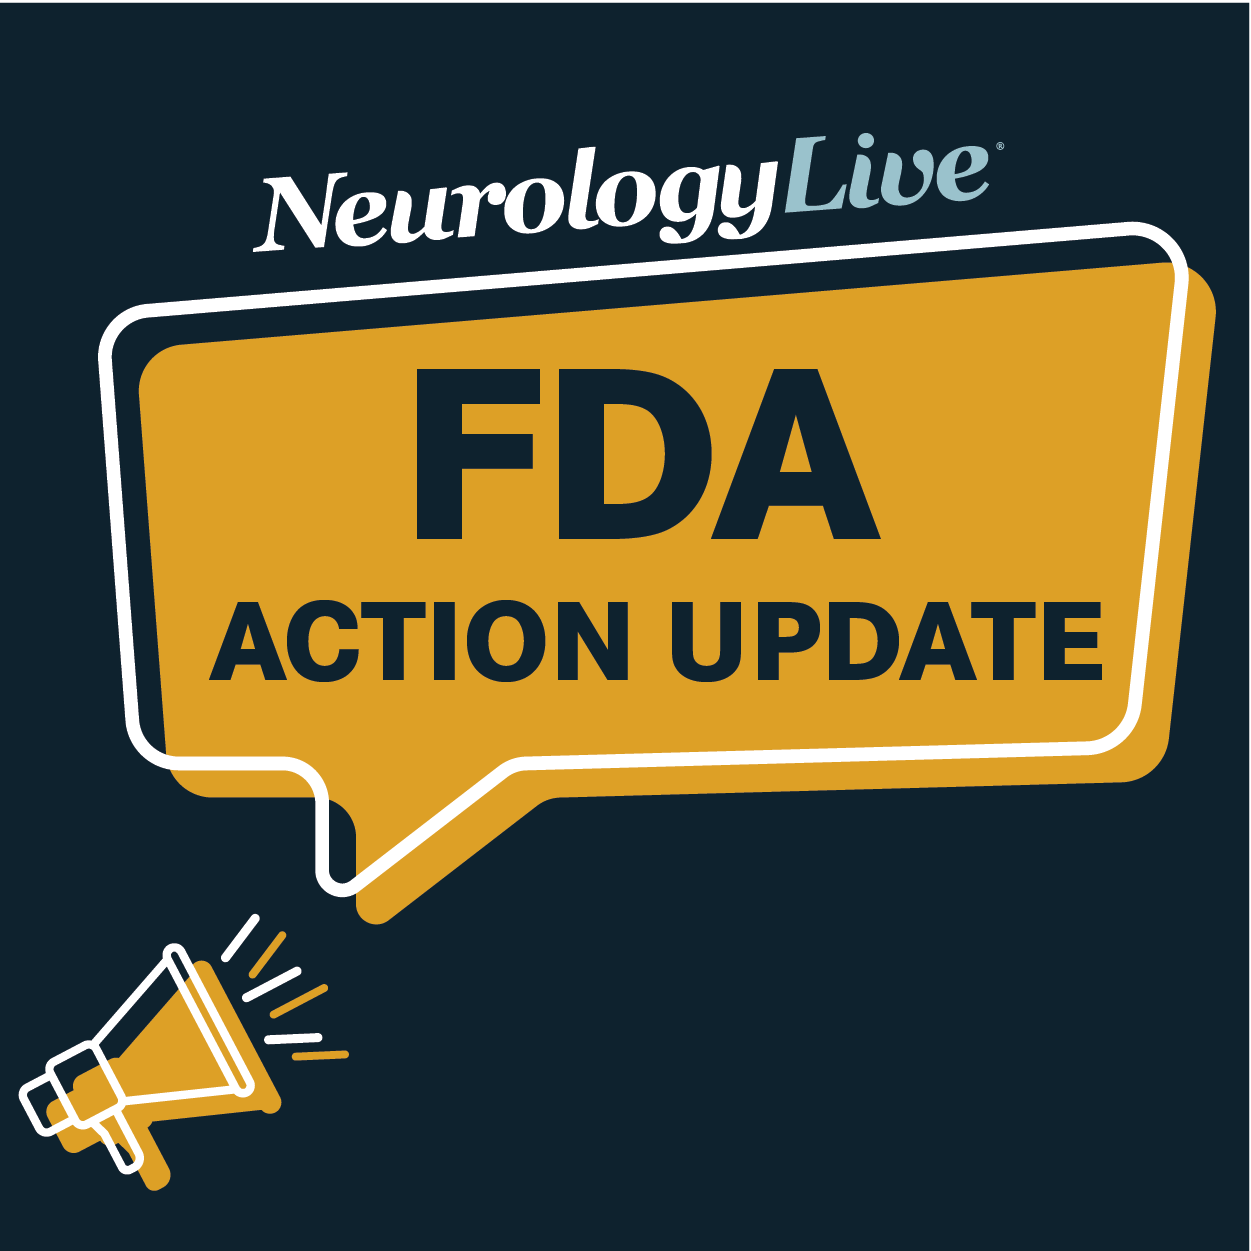 FDA Action Update, November 2022: Application Acceptances and a Refusal to File